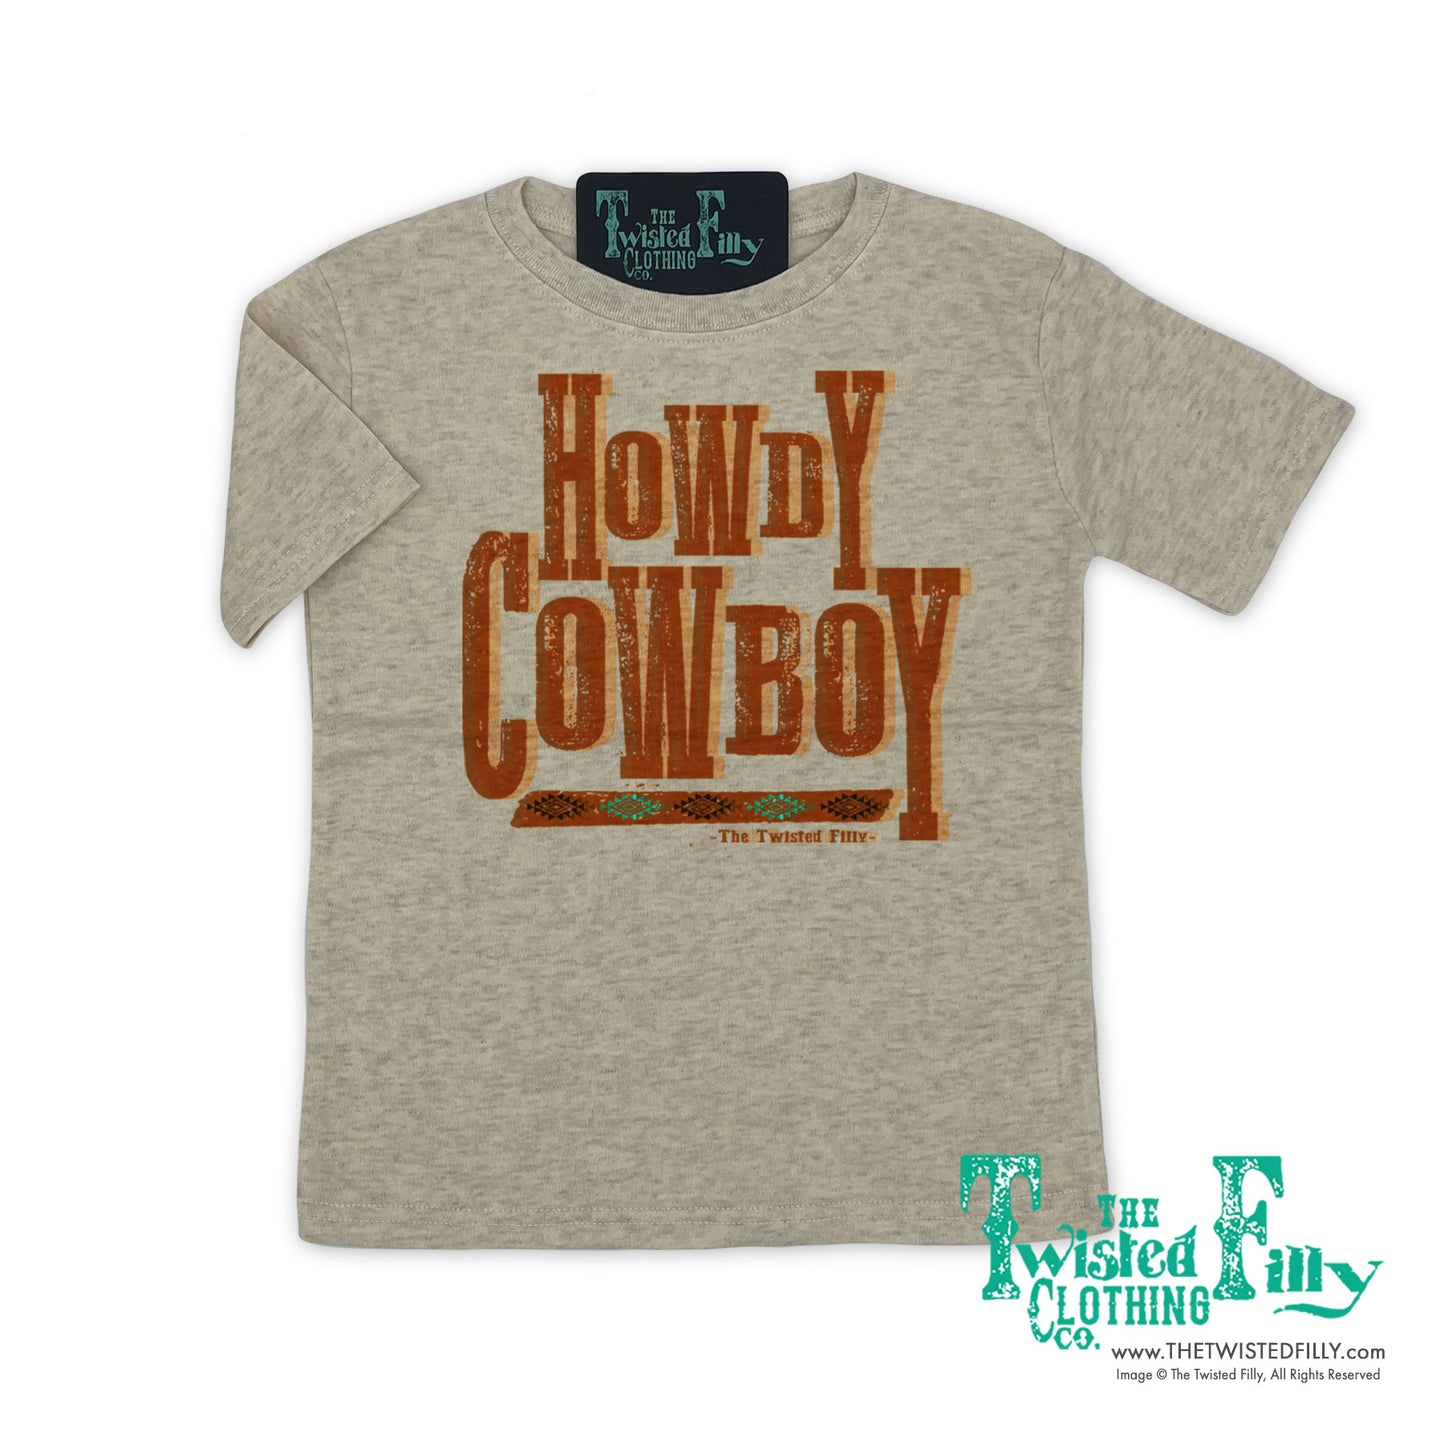 Howdy Cowboy - S/S Girls Youth Tee - Assorted Colors